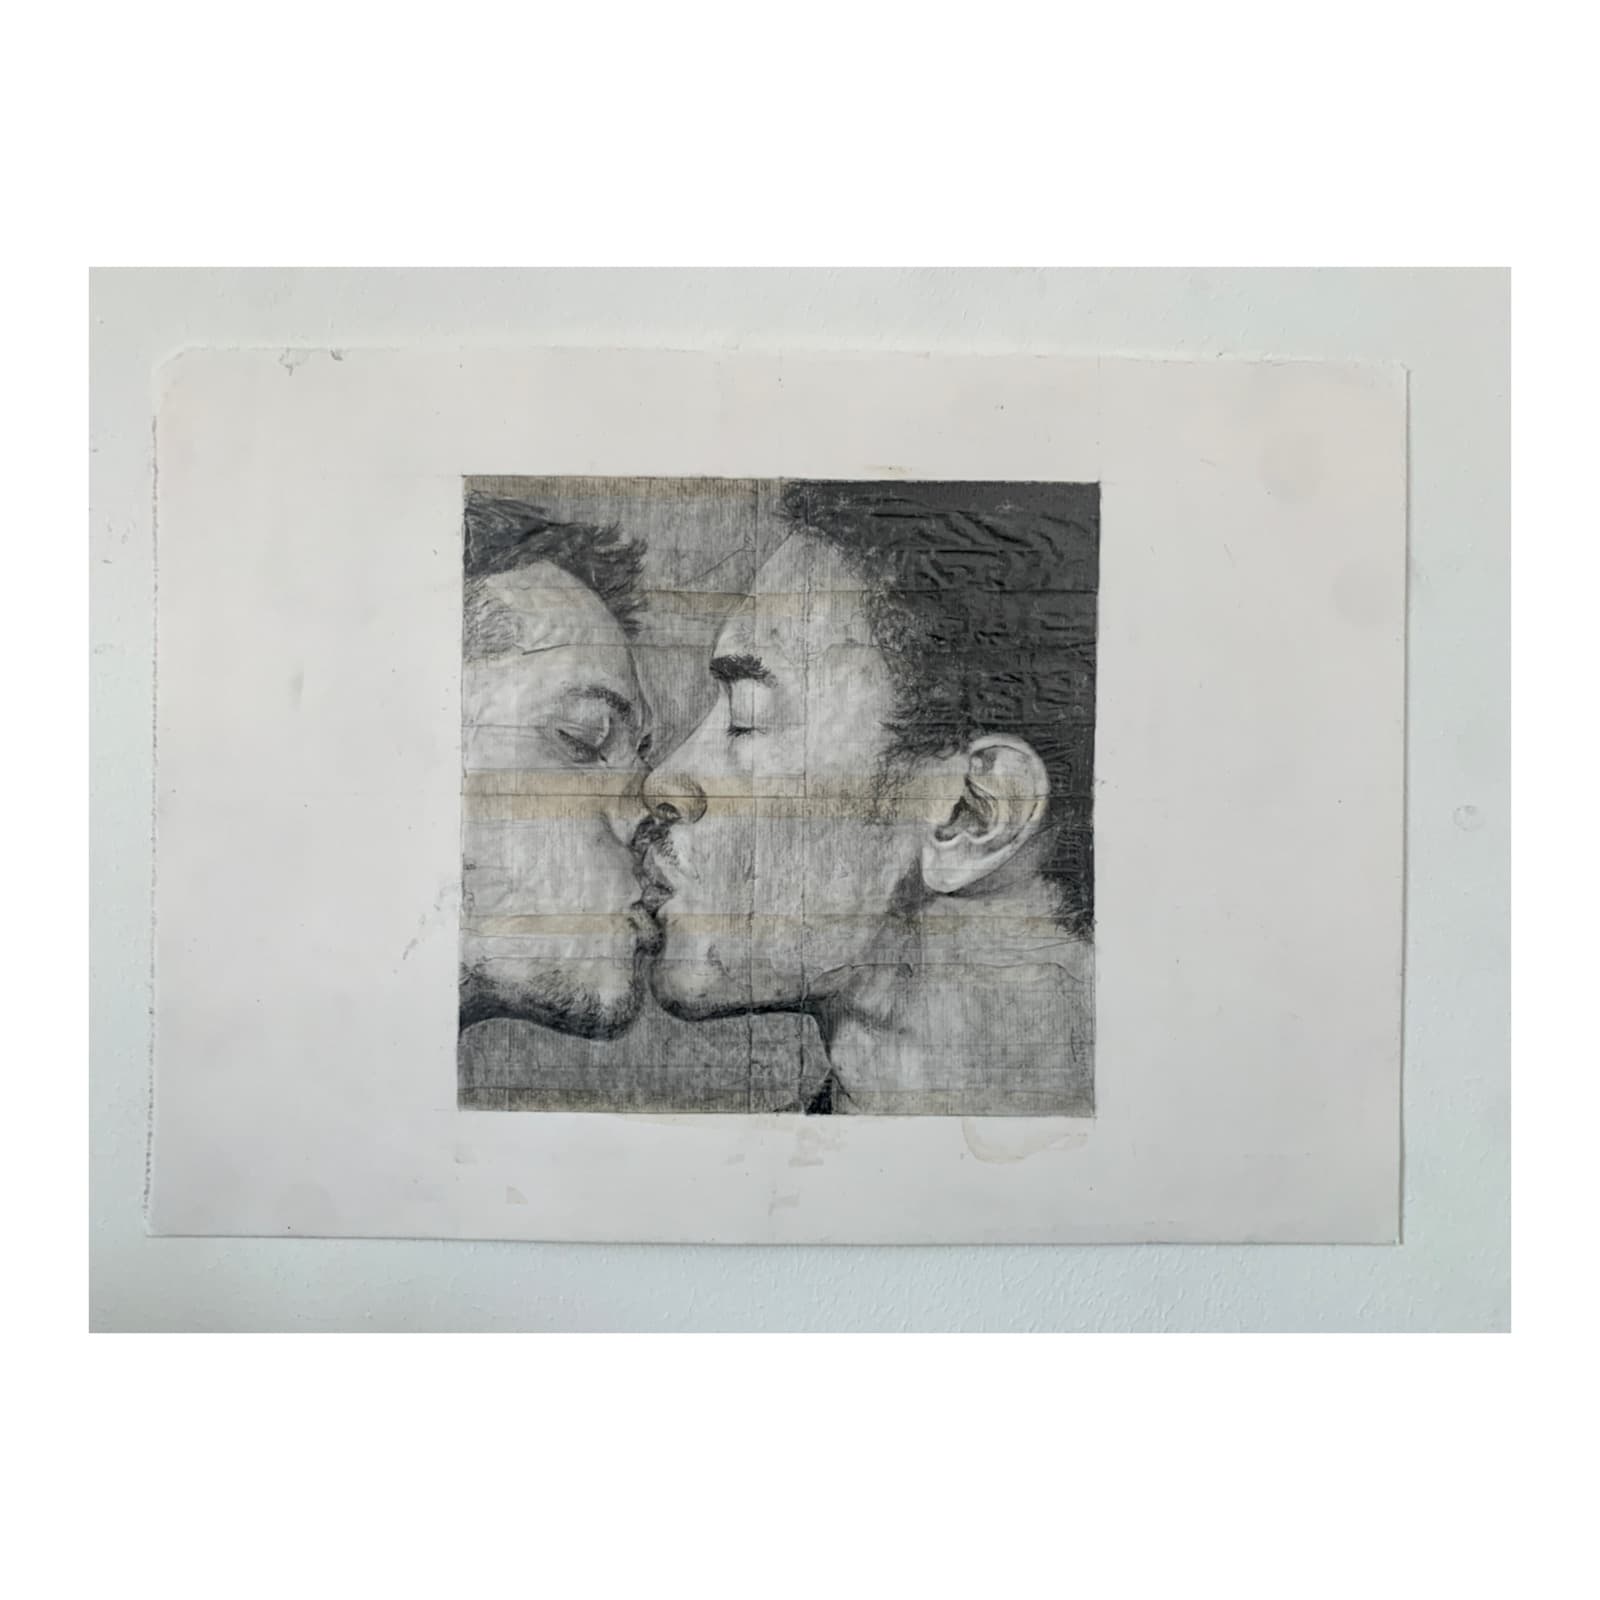 There is never more than a fag paper between them- Nathan and Jeremiah- Pencil Artwork on Fag Paper thumbnail-1